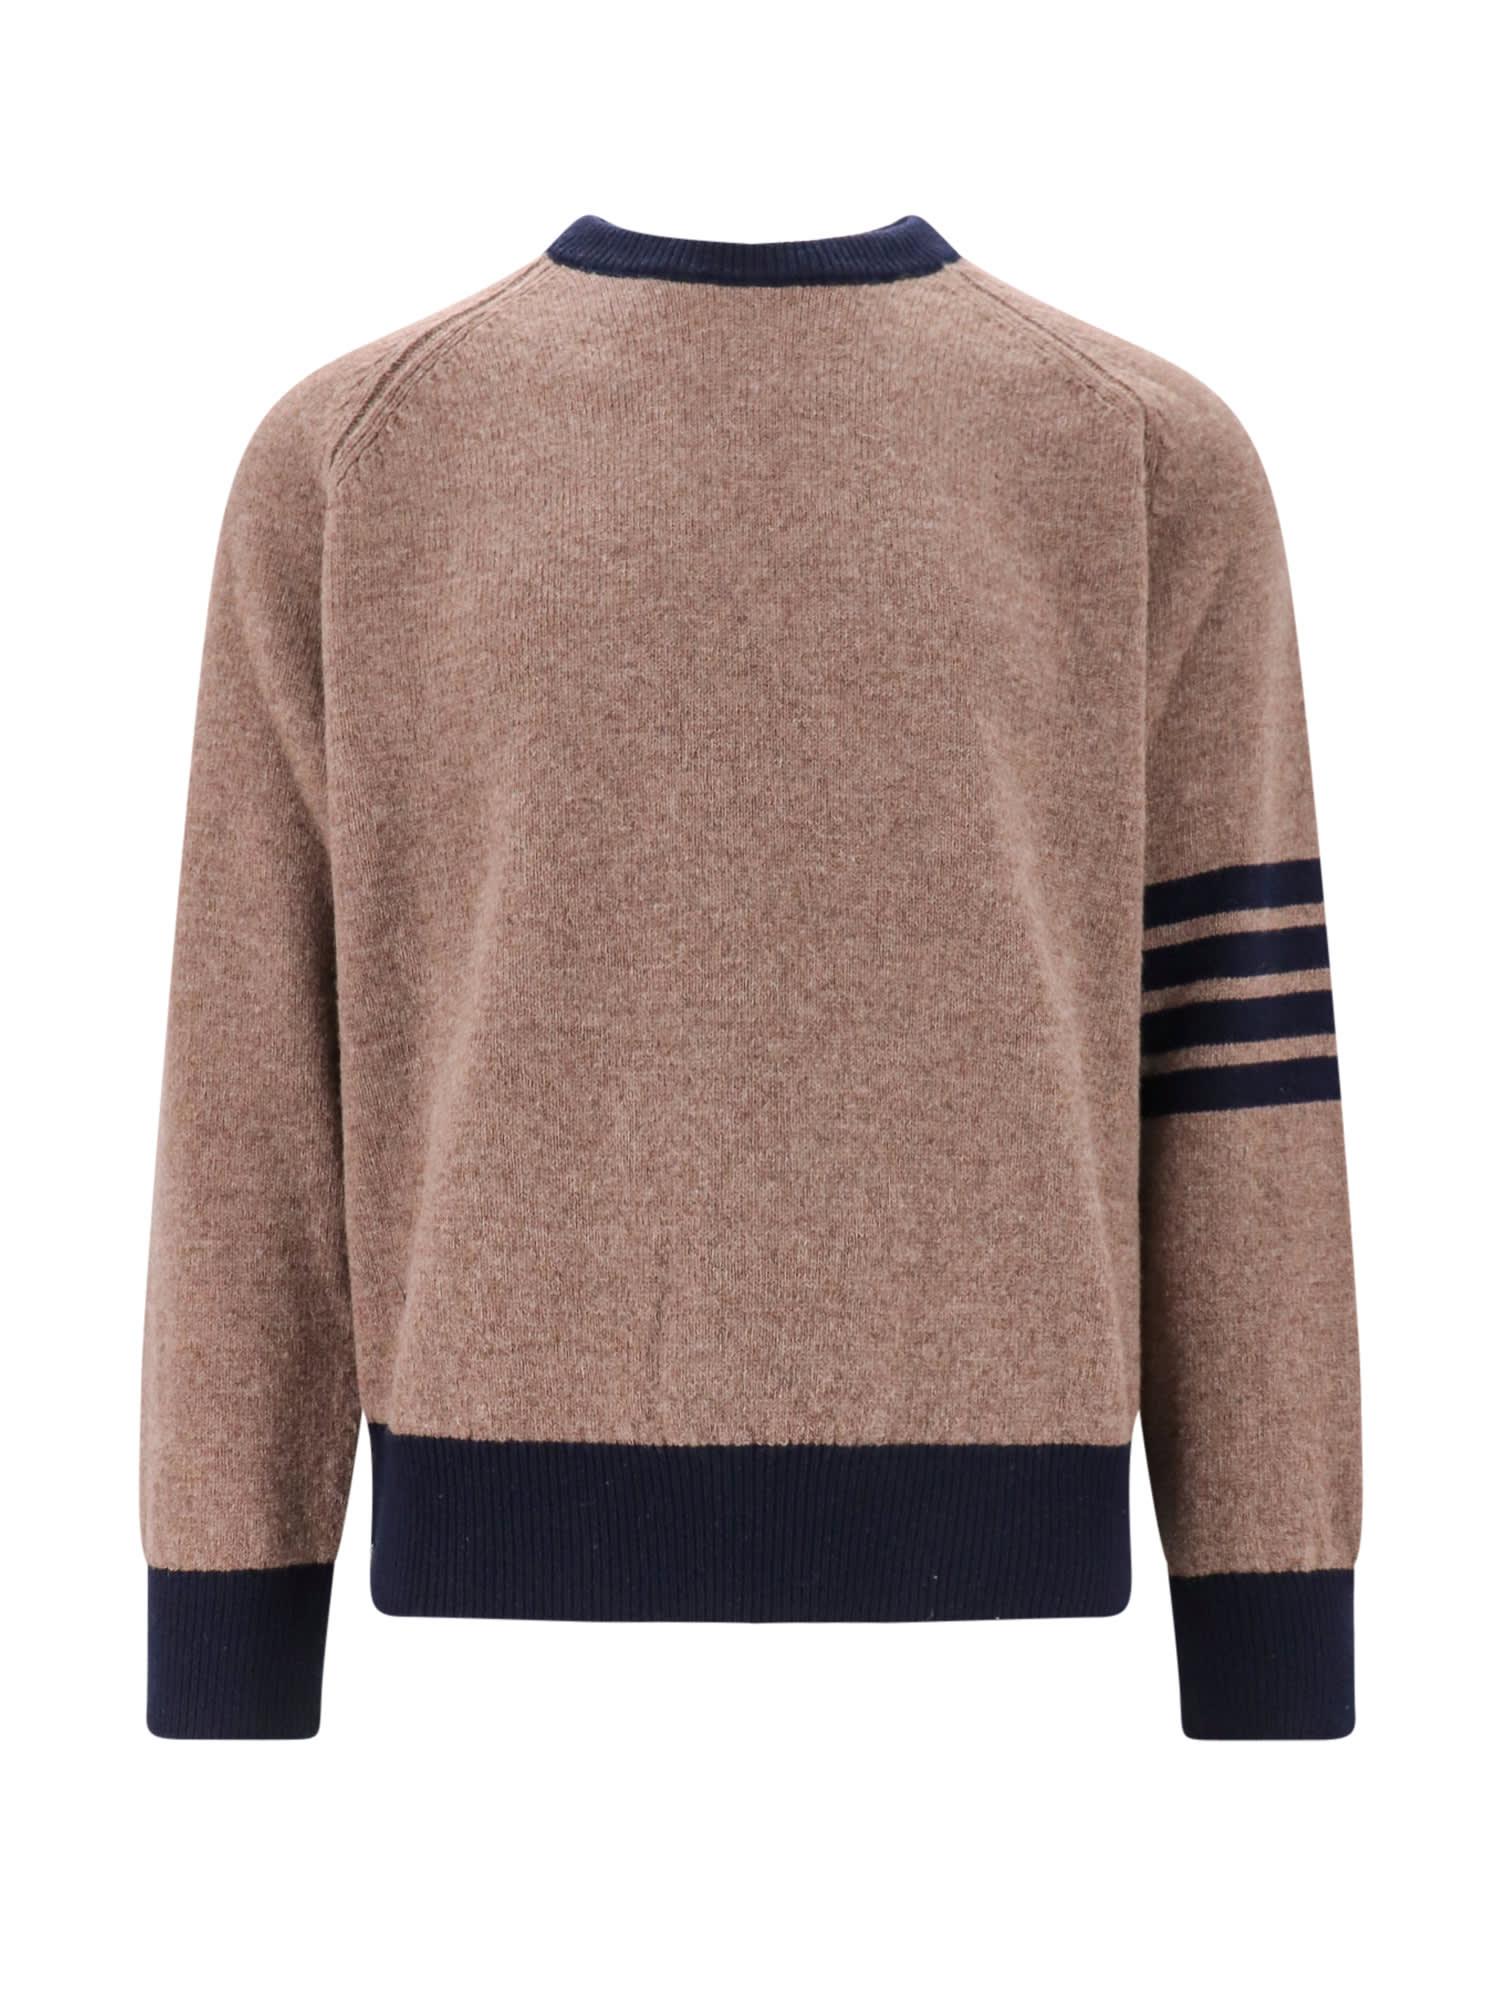 Thom Browne Sweater in Brown for Men | Lyst